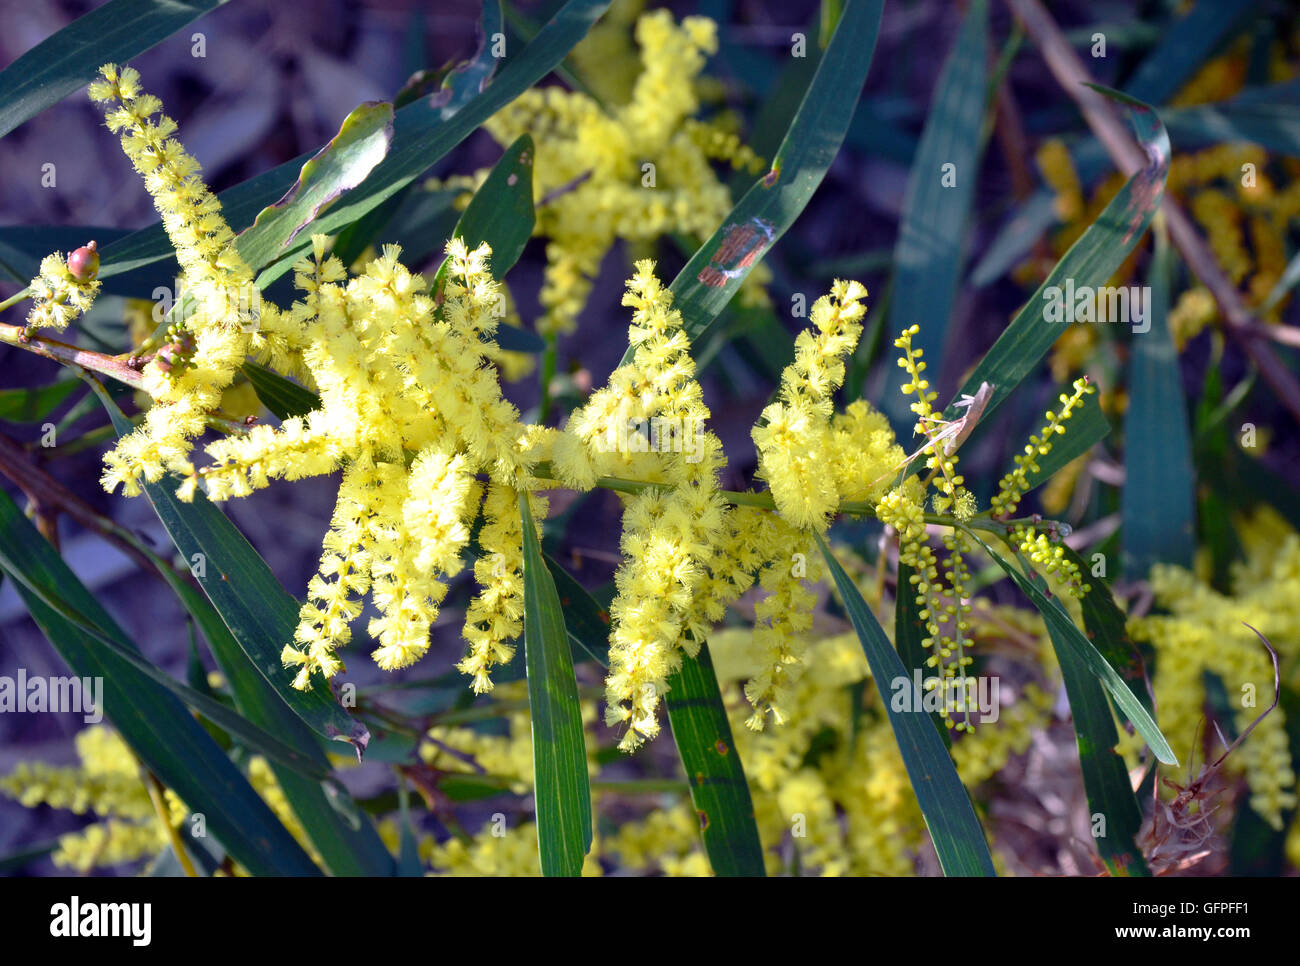 Yellow flowers of the Sydney Golden Wattle (Acacia longifolia) in the Royal National Park, New South Wales, Australia Stock Photo